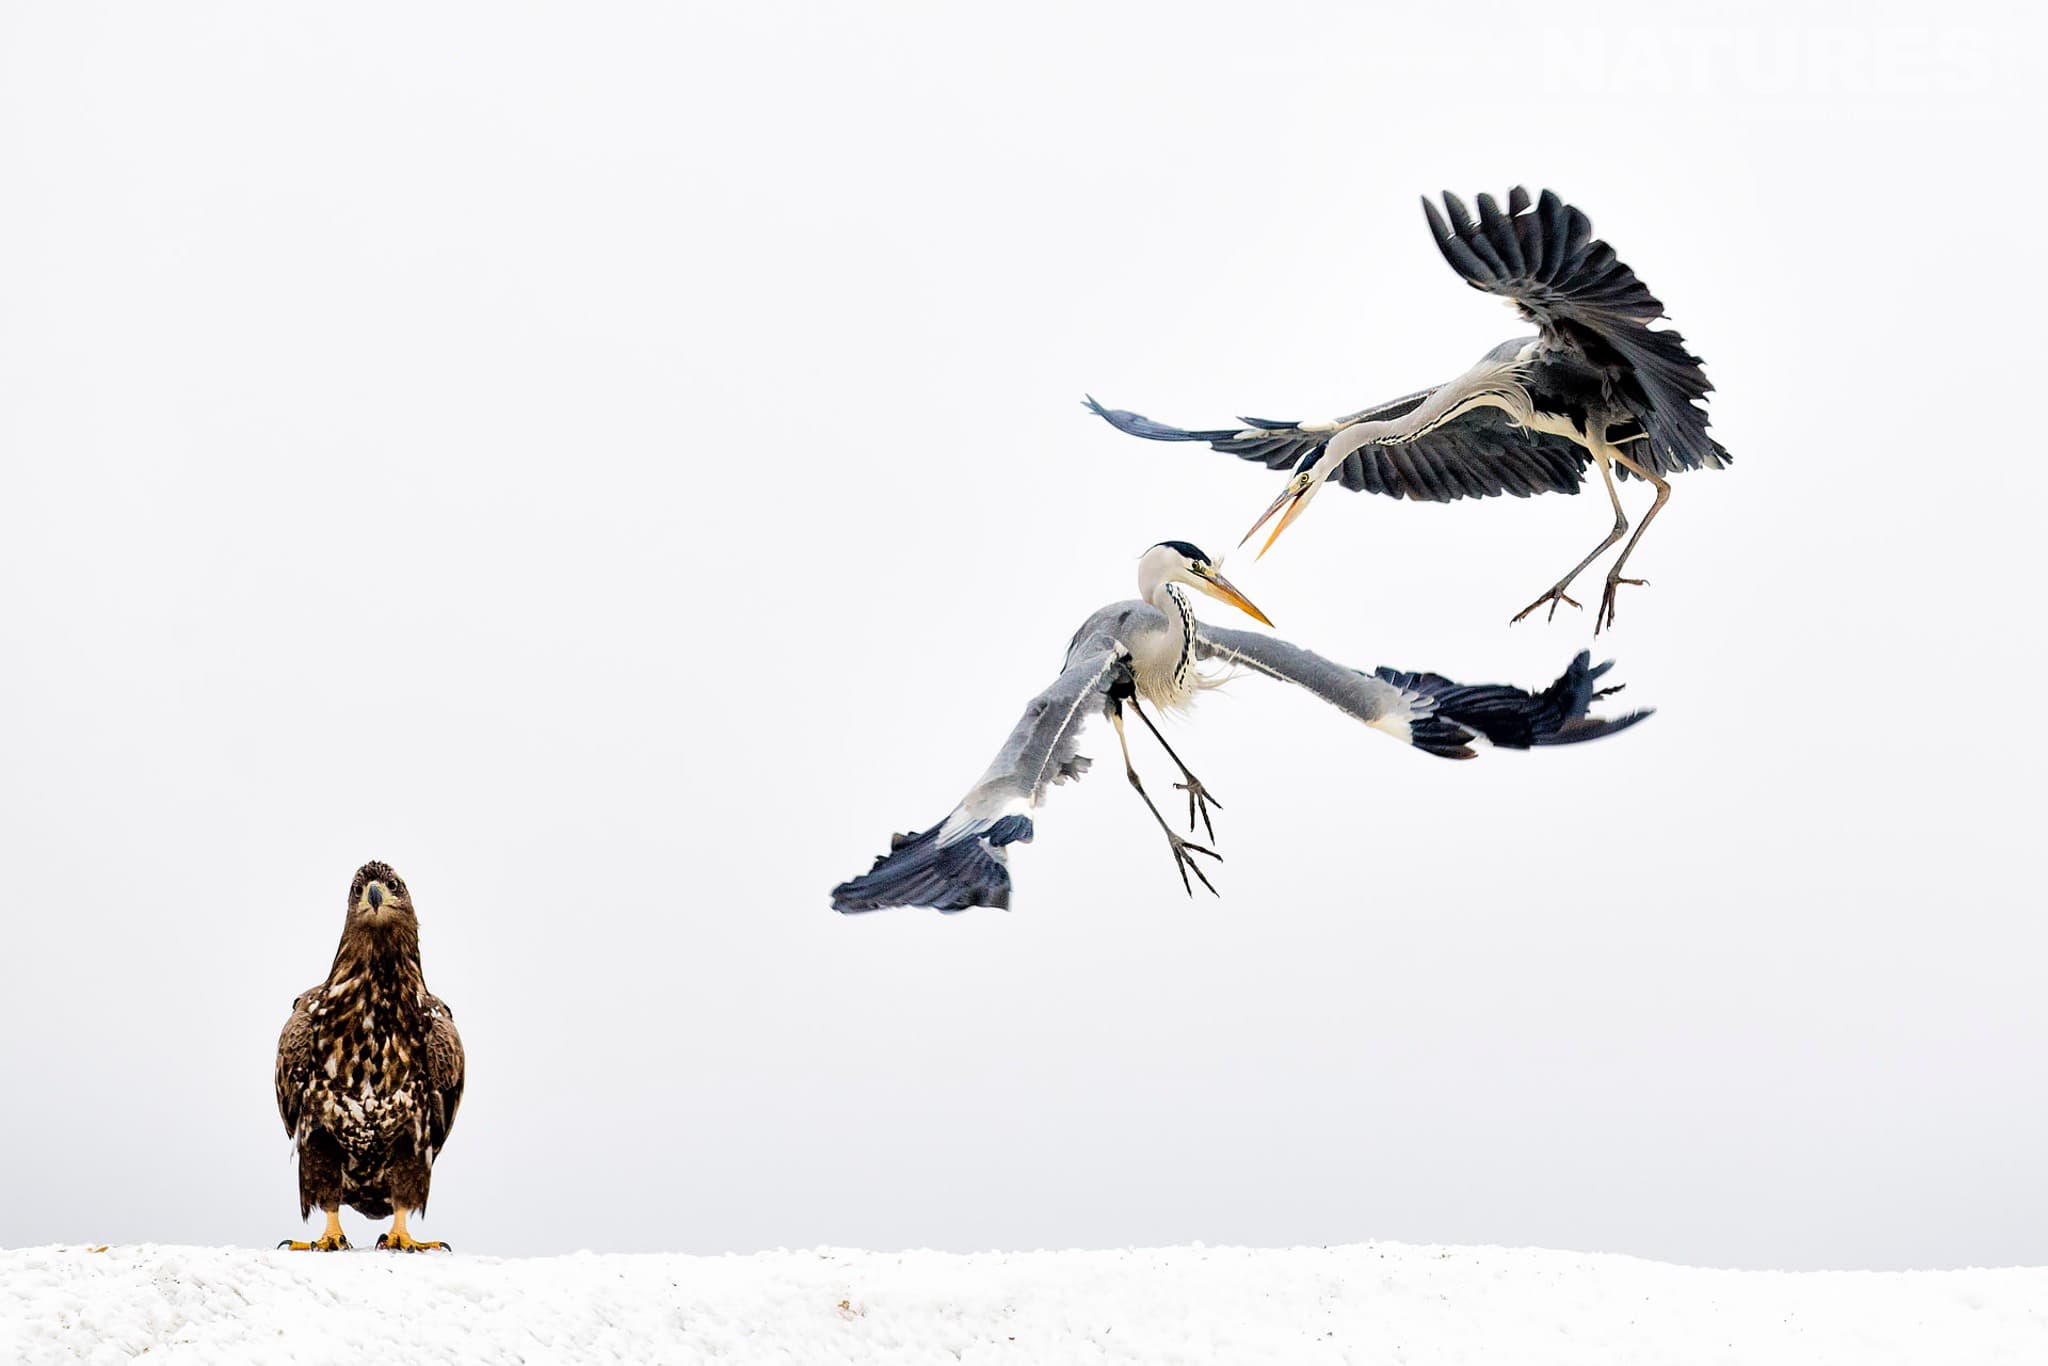 Feeding frenzy at Bence Máté's Photography Hides during the Hungarian Winter